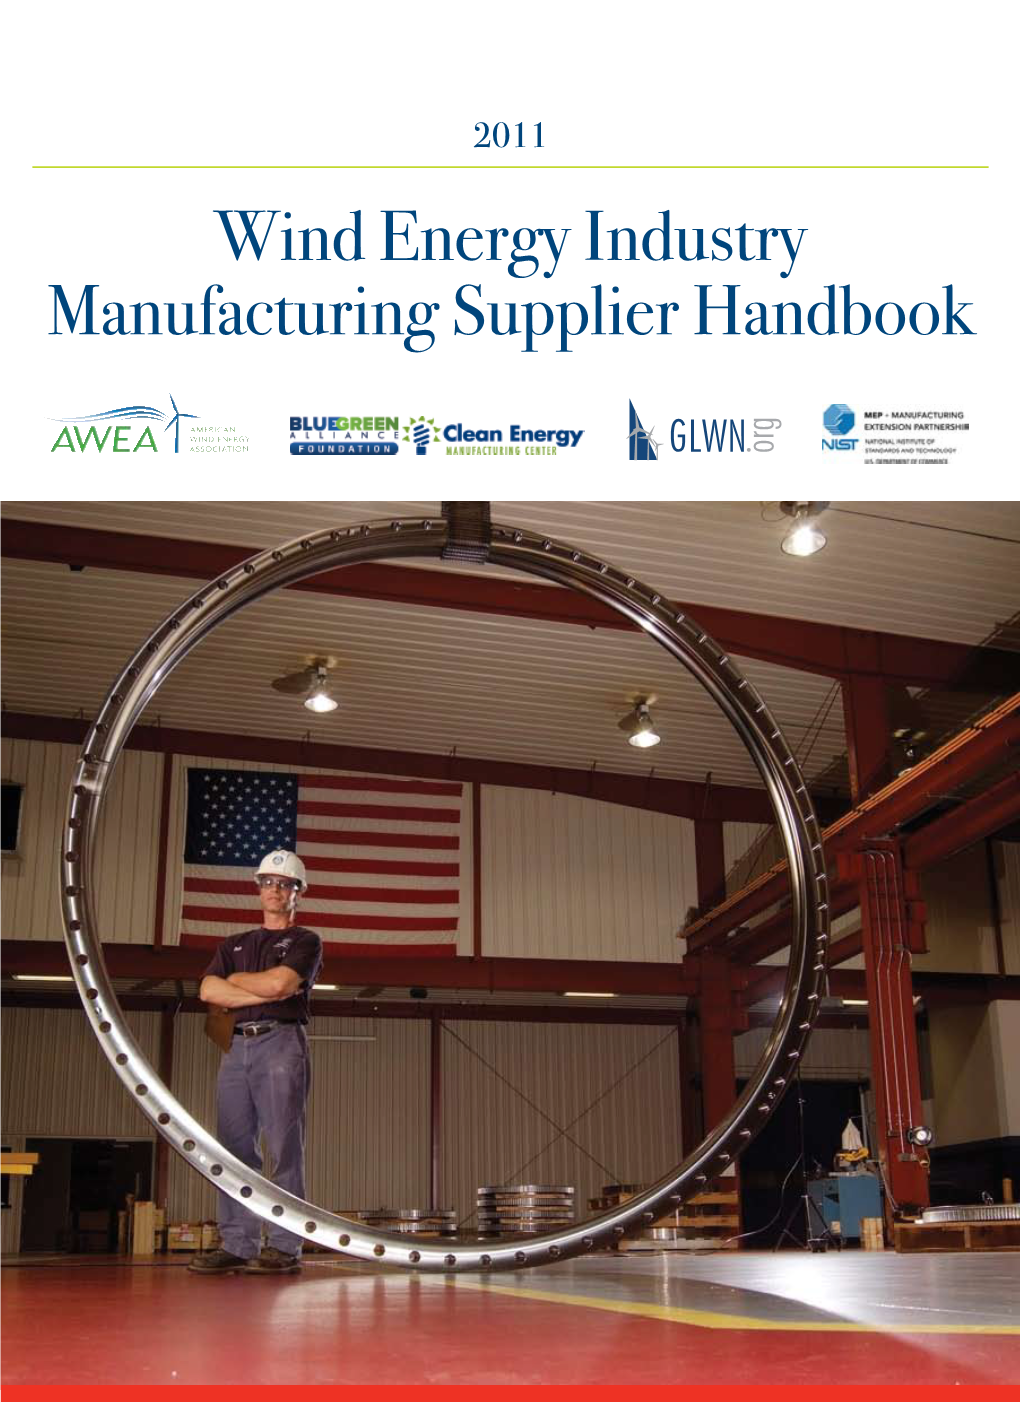 Wind Energy Industry Manufacturing Supplier Handbook About the Sponsors